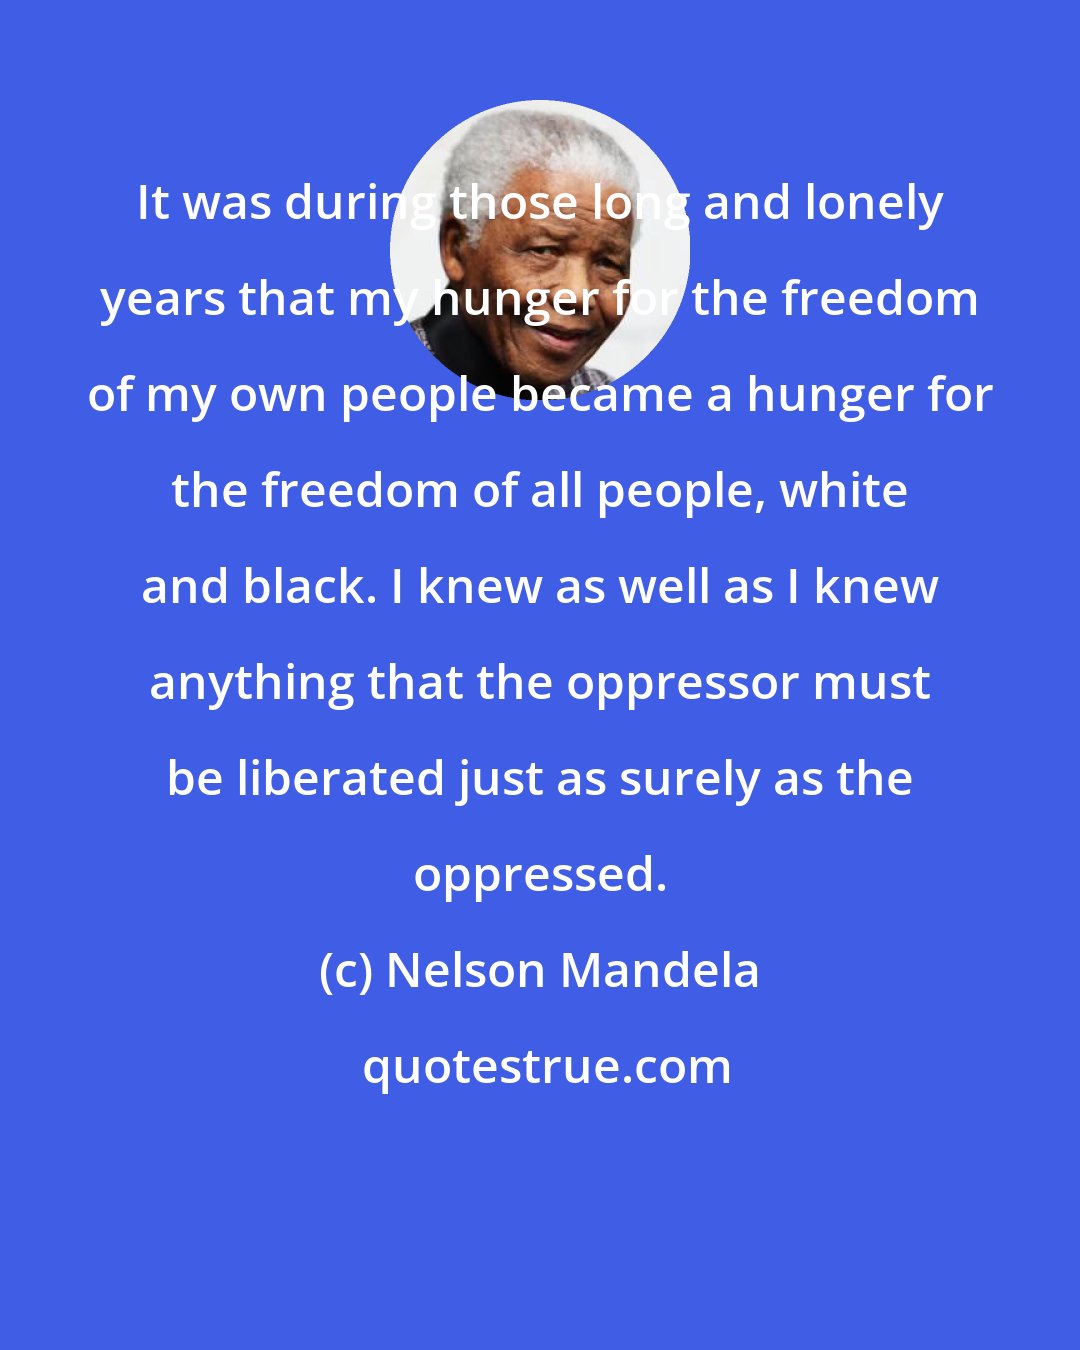 Nelson Mandela: It was during those long and lonely years that my hunger for the freedom of my own people became a hunger for the freedom of all people, white and black. I knew as well as I knew anything that the oppressor must be liberated just as surely as the oppressed.